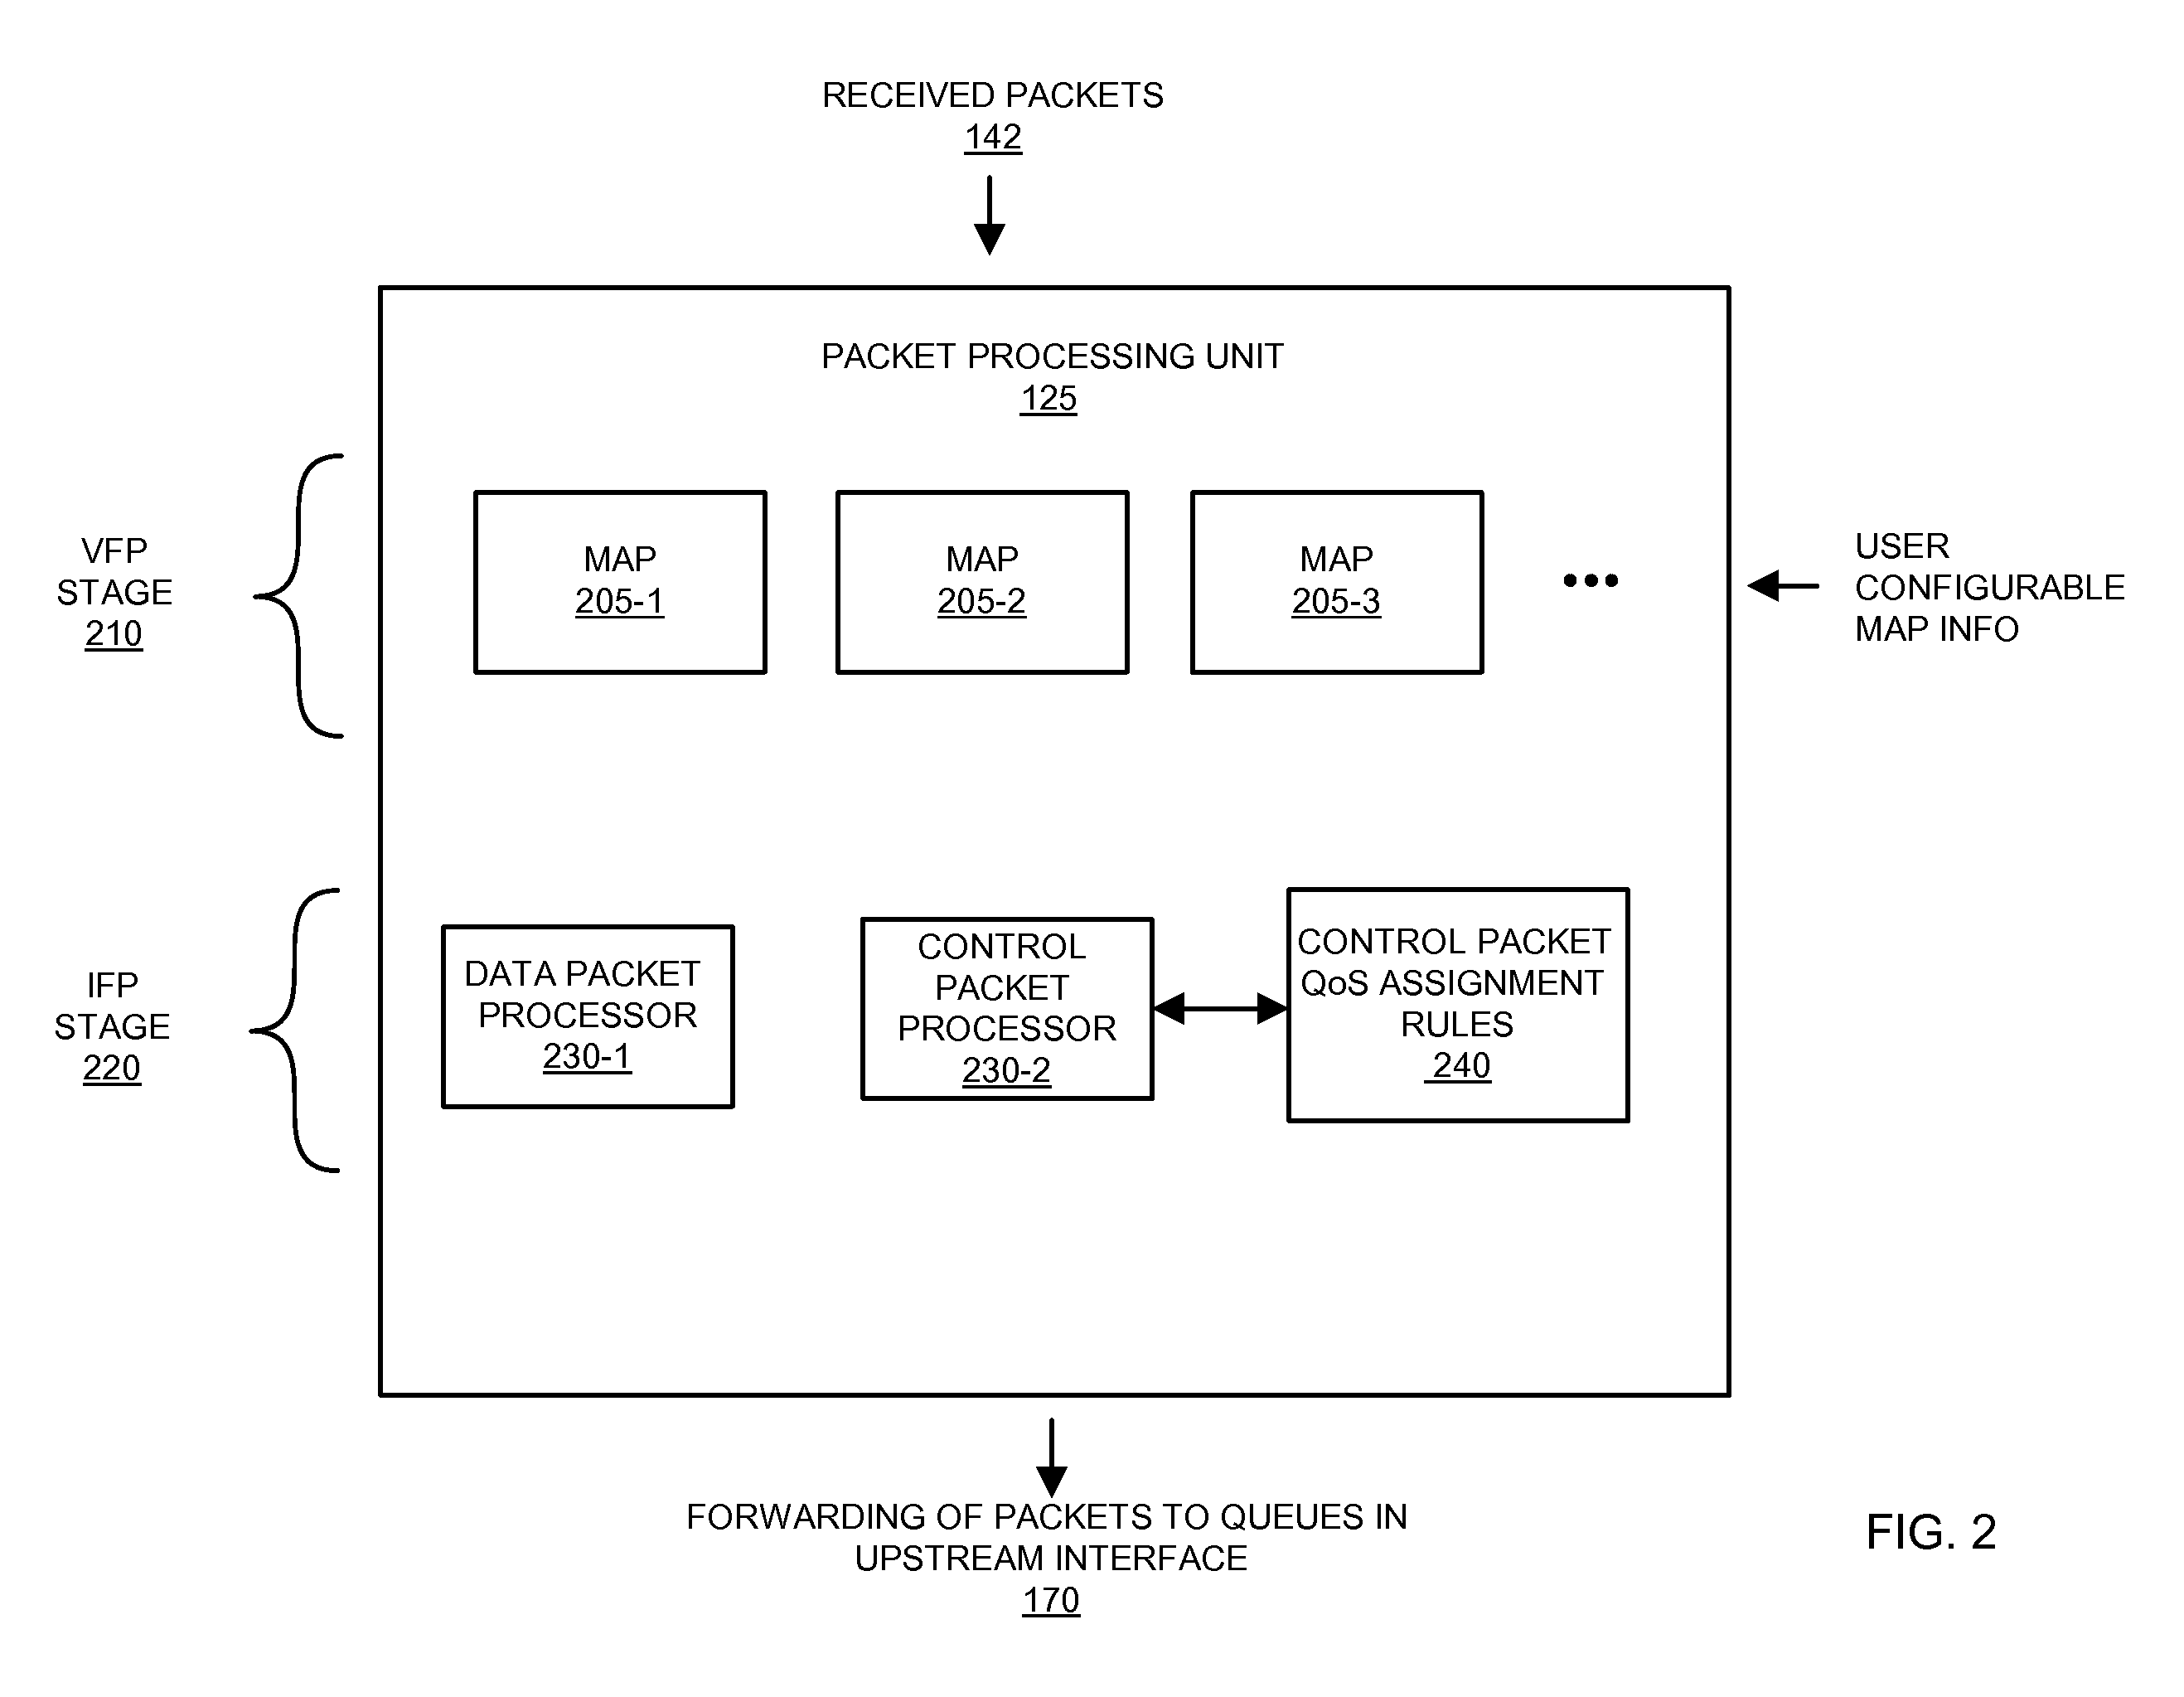 IMPLEMENTATION OF A QoS PROCESSING FILTER TO MANAGE UPSTREAM OVER-SUBSCRIPTION